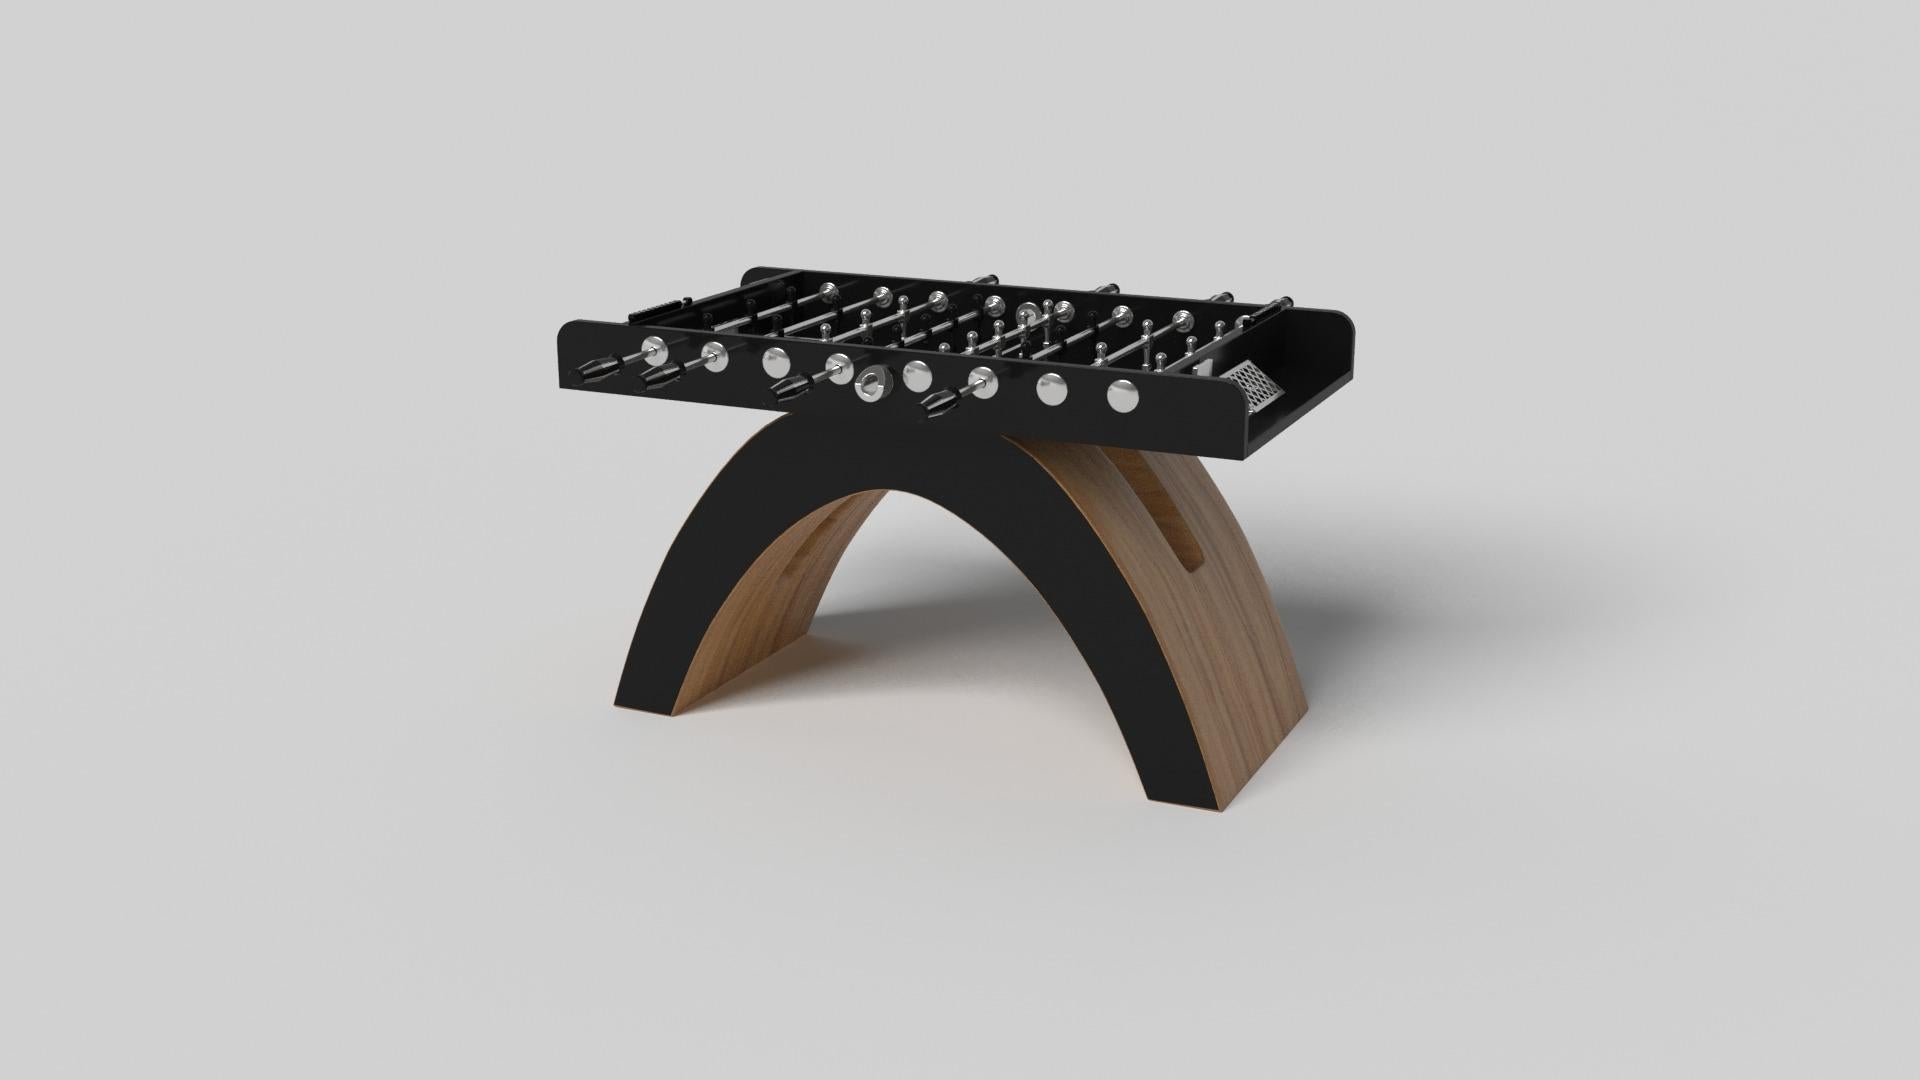 An open, arched base balances beautifully against the hard edges of the rectangular surface top, making the Zenith foosball table in black with red a striking juxtaposition of modern, geometric forms. Minimalist in its appeal yet luxurious in